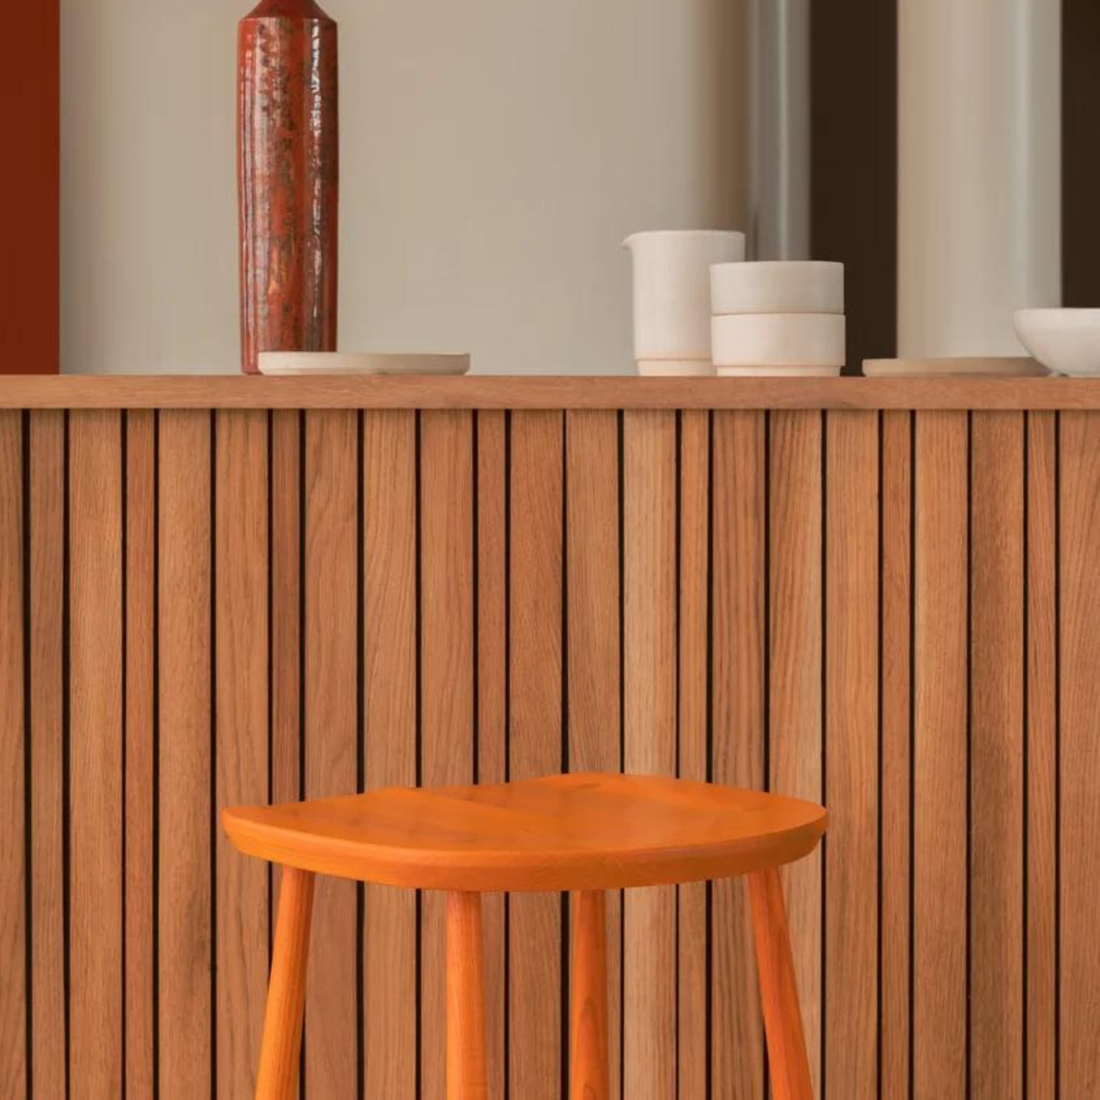 Utility Counter | Stool